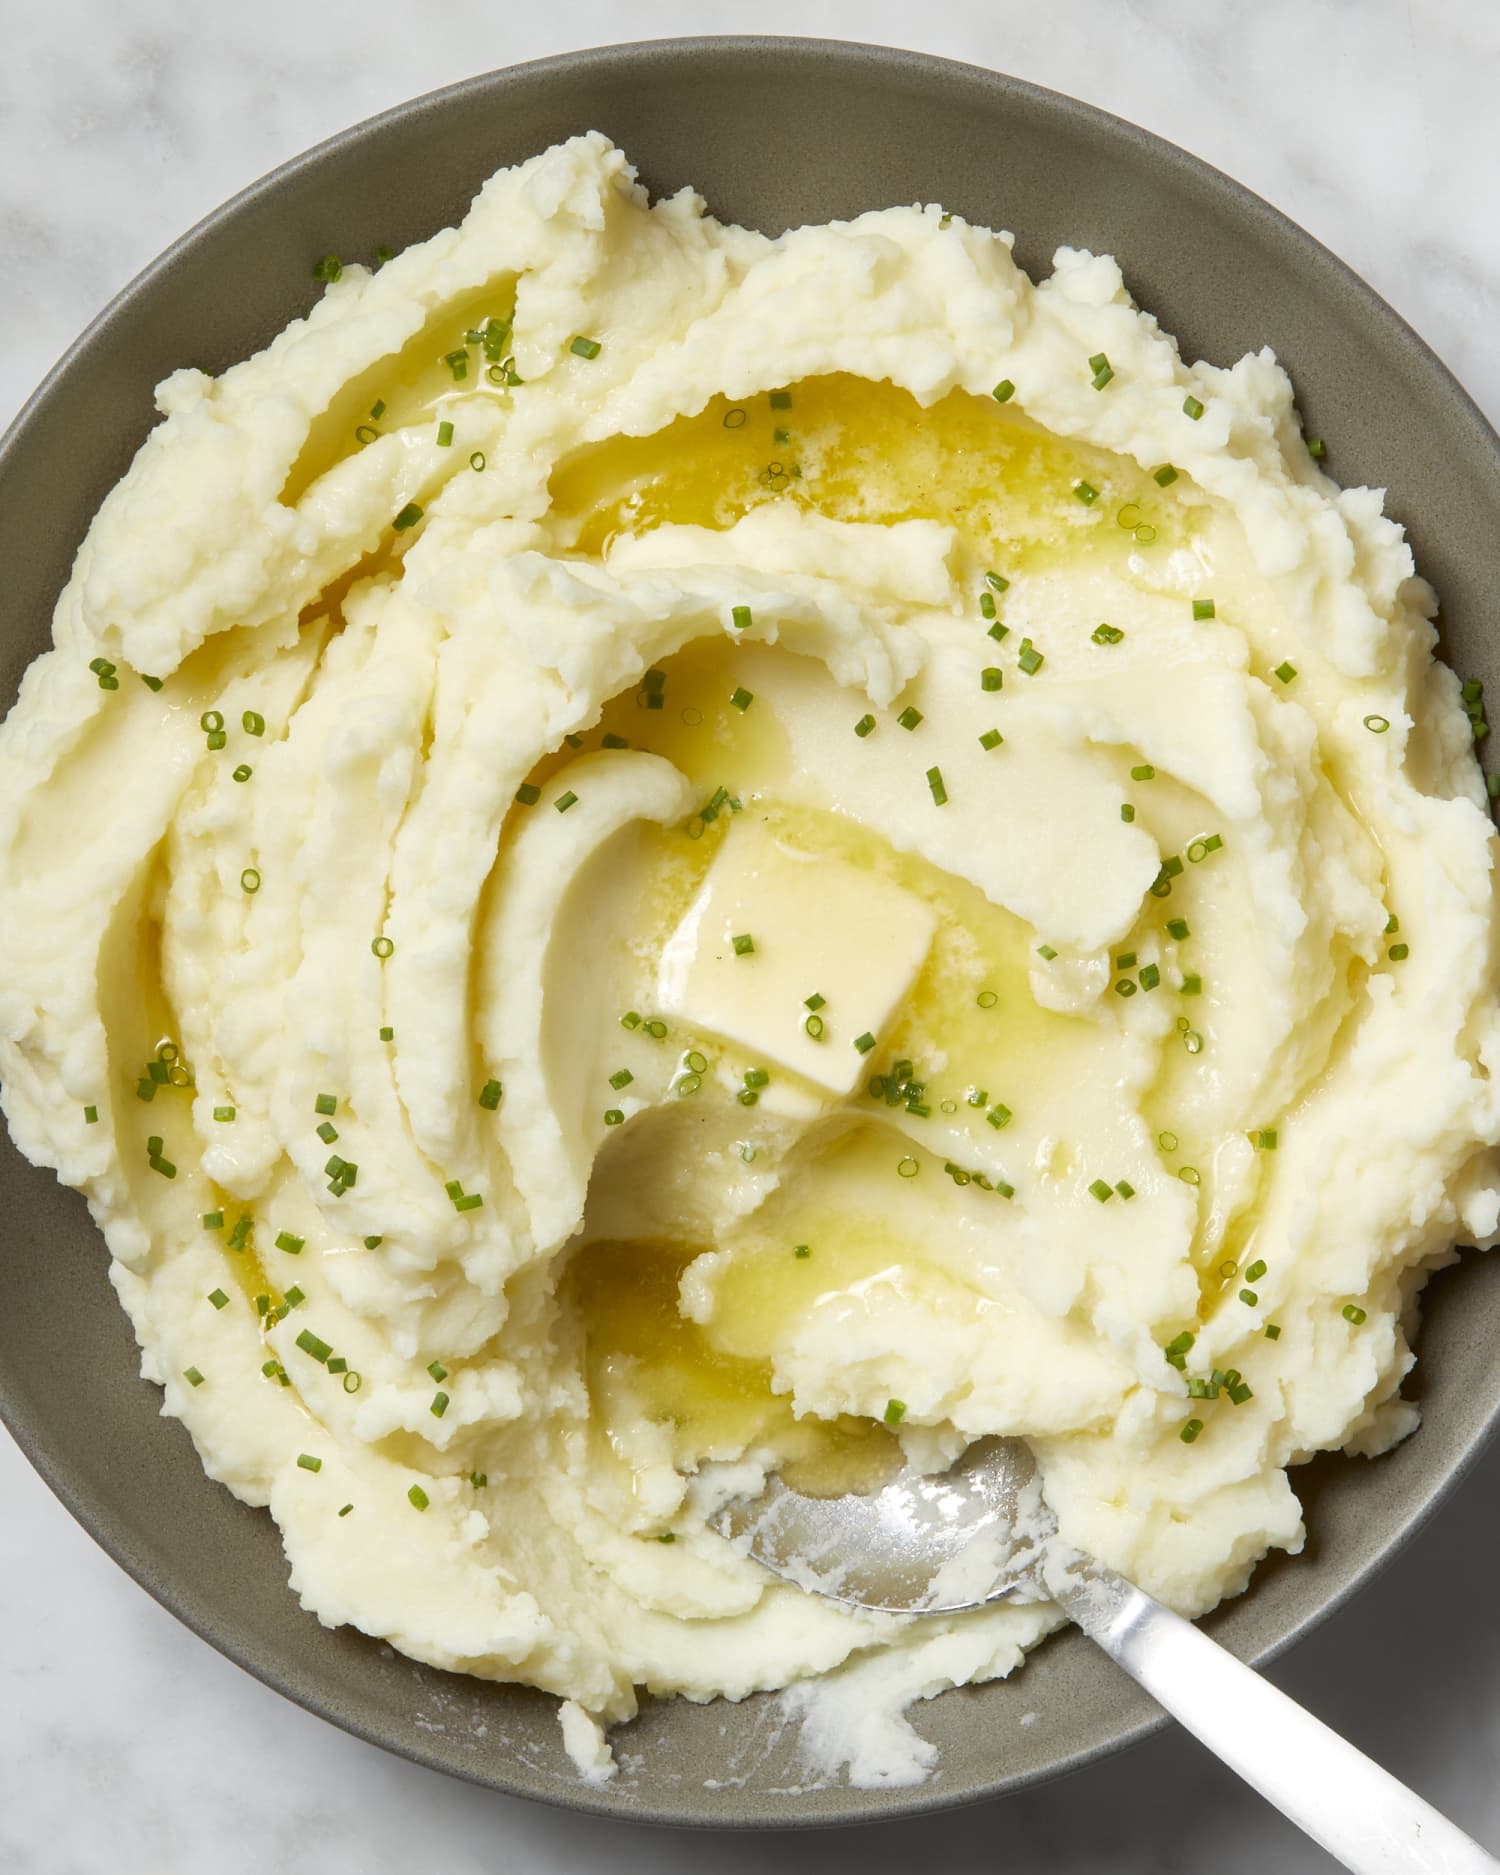 Adding This One Ingredient to the Milk Guarantees the Most Incredible Mashed Potatoes